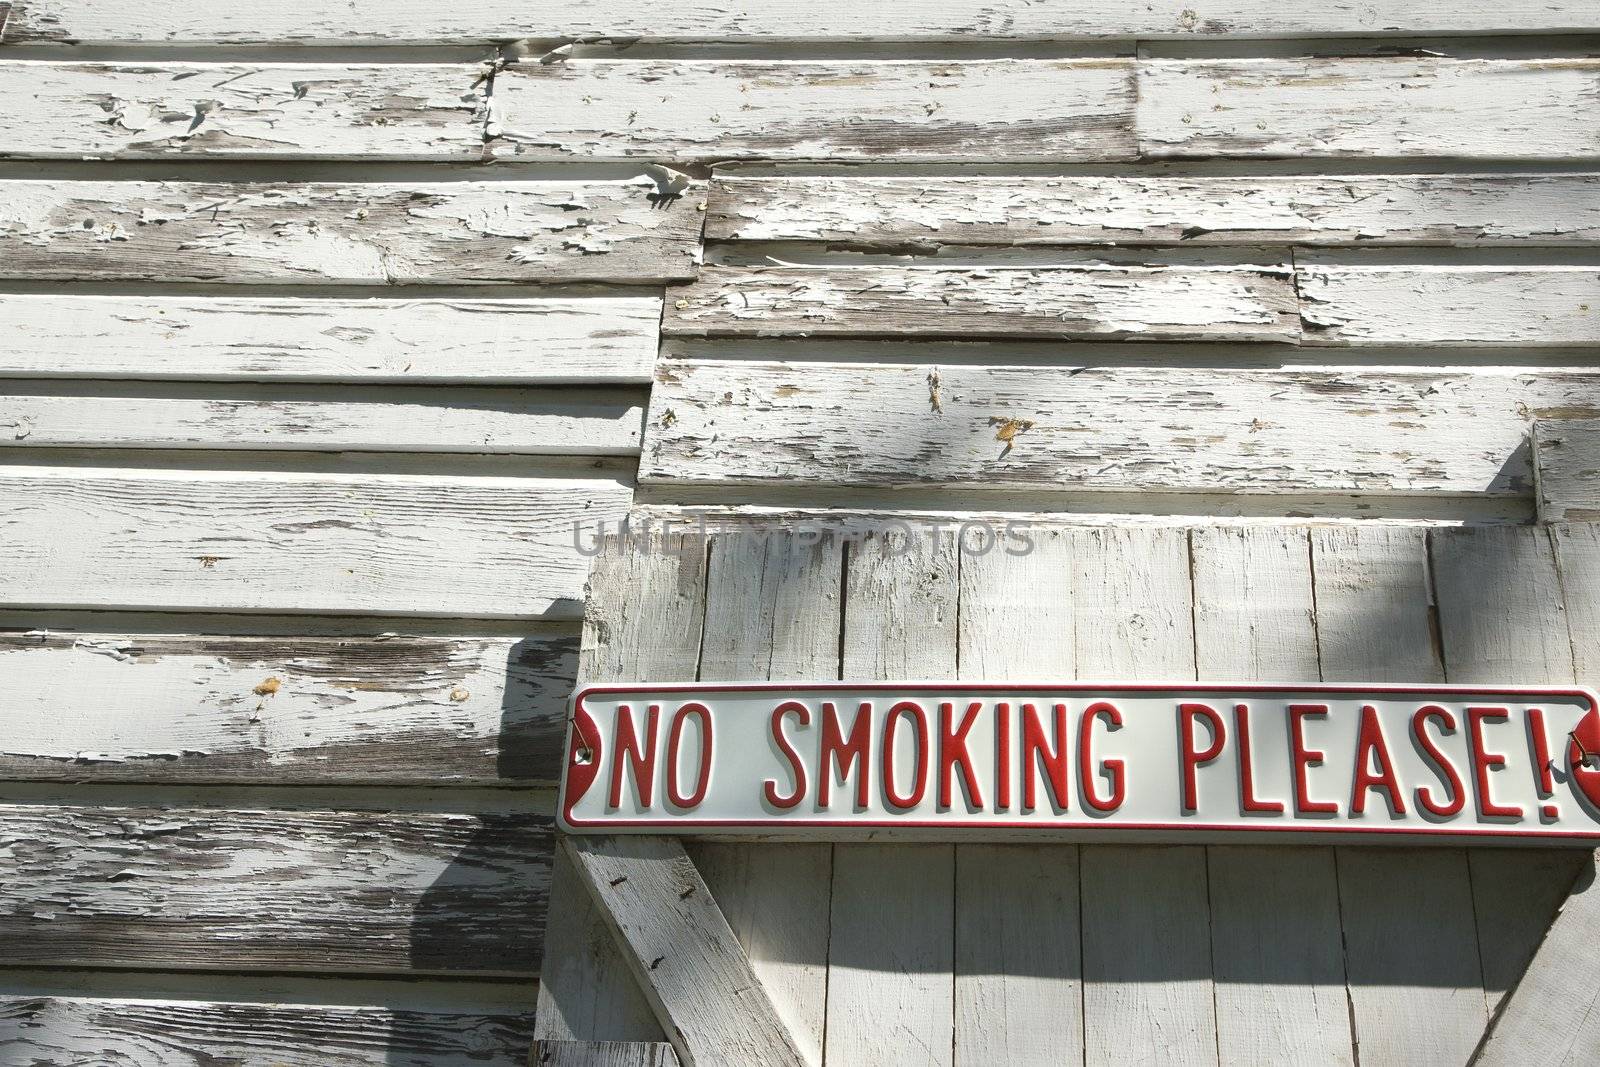 Sign on old white peeling building reading "No smoking please!".